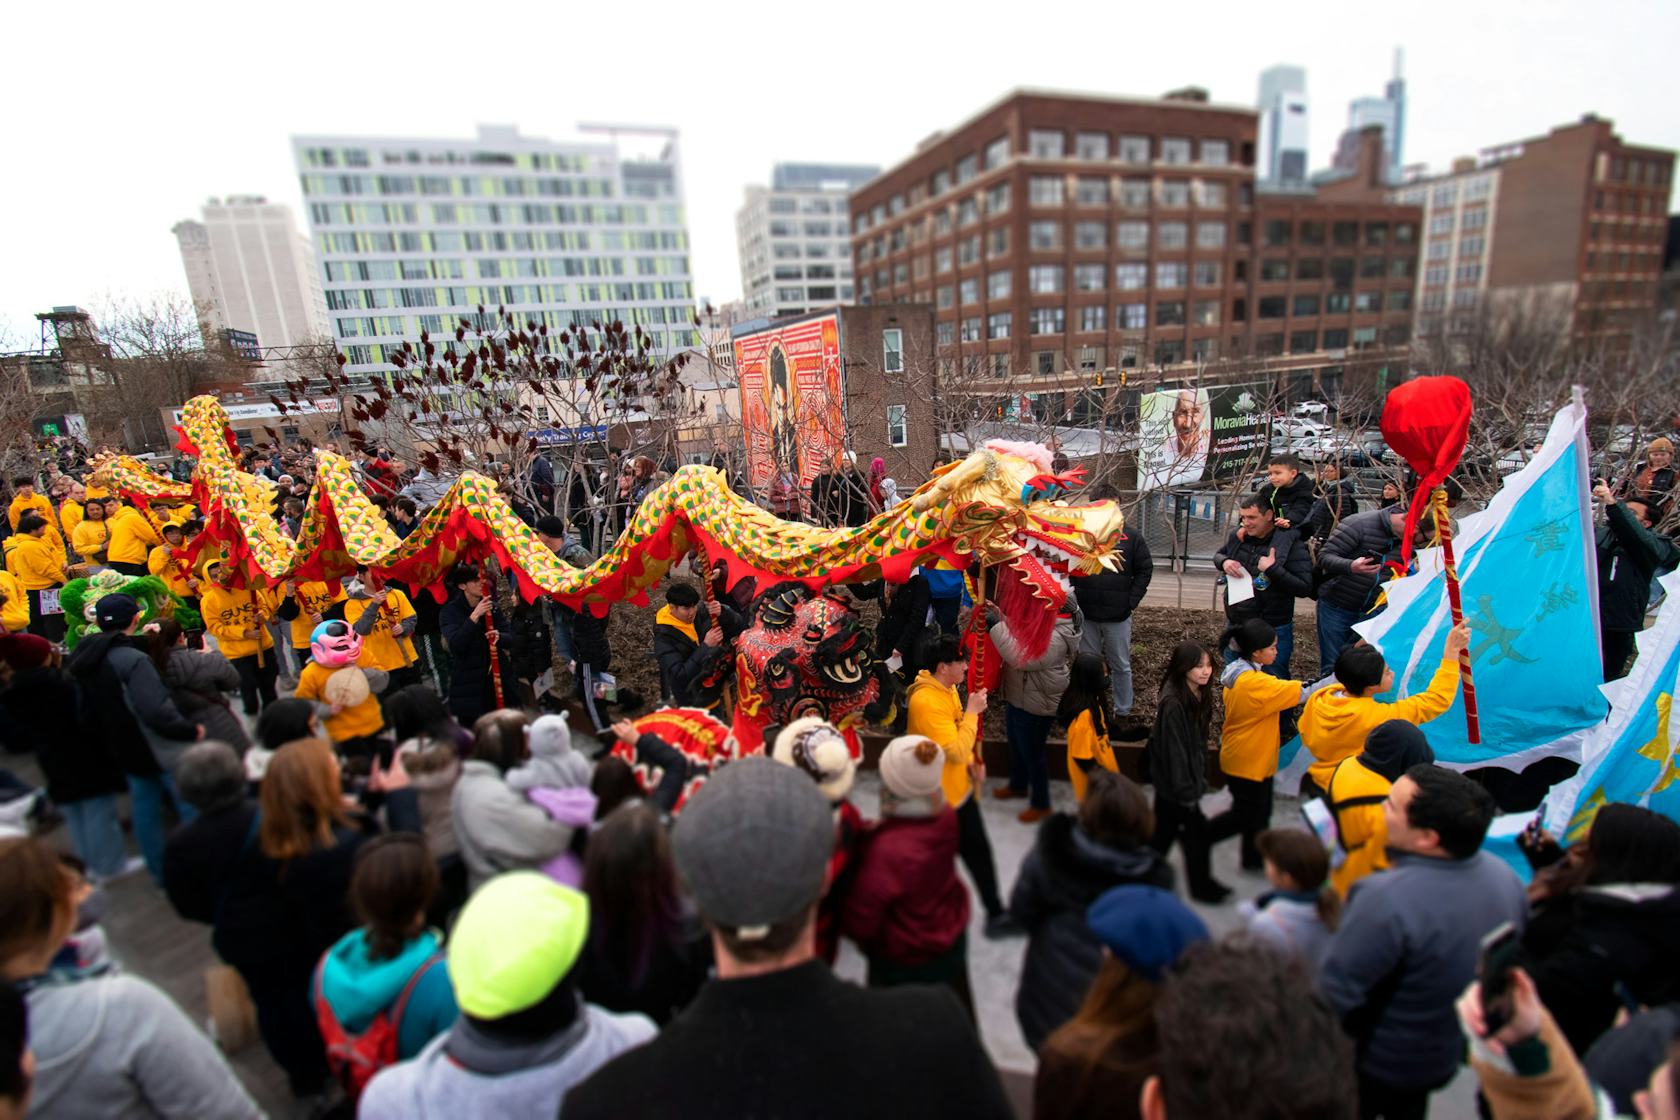 Lion Dancers perform in front of a crowd at the Rail Park